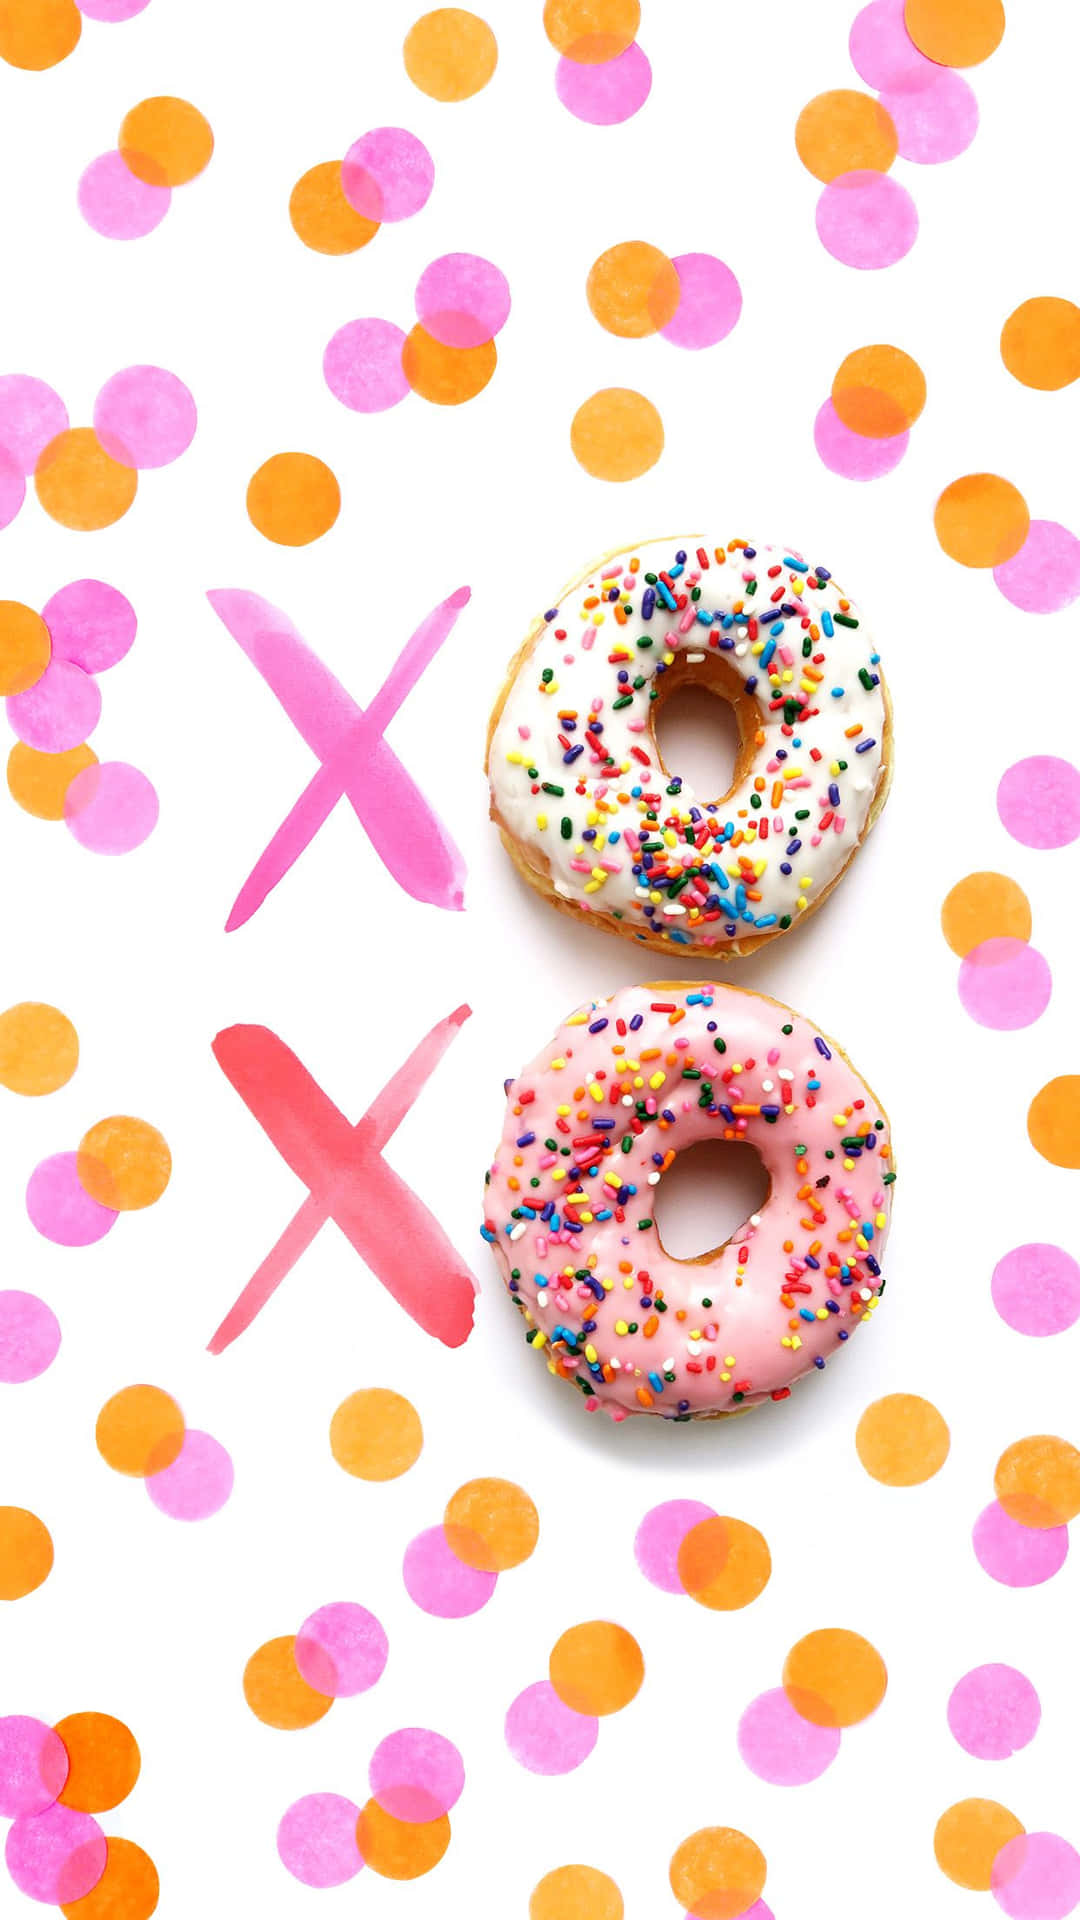 Download Exciting new flavors at Dunkin Donuts | Wallpapers.com